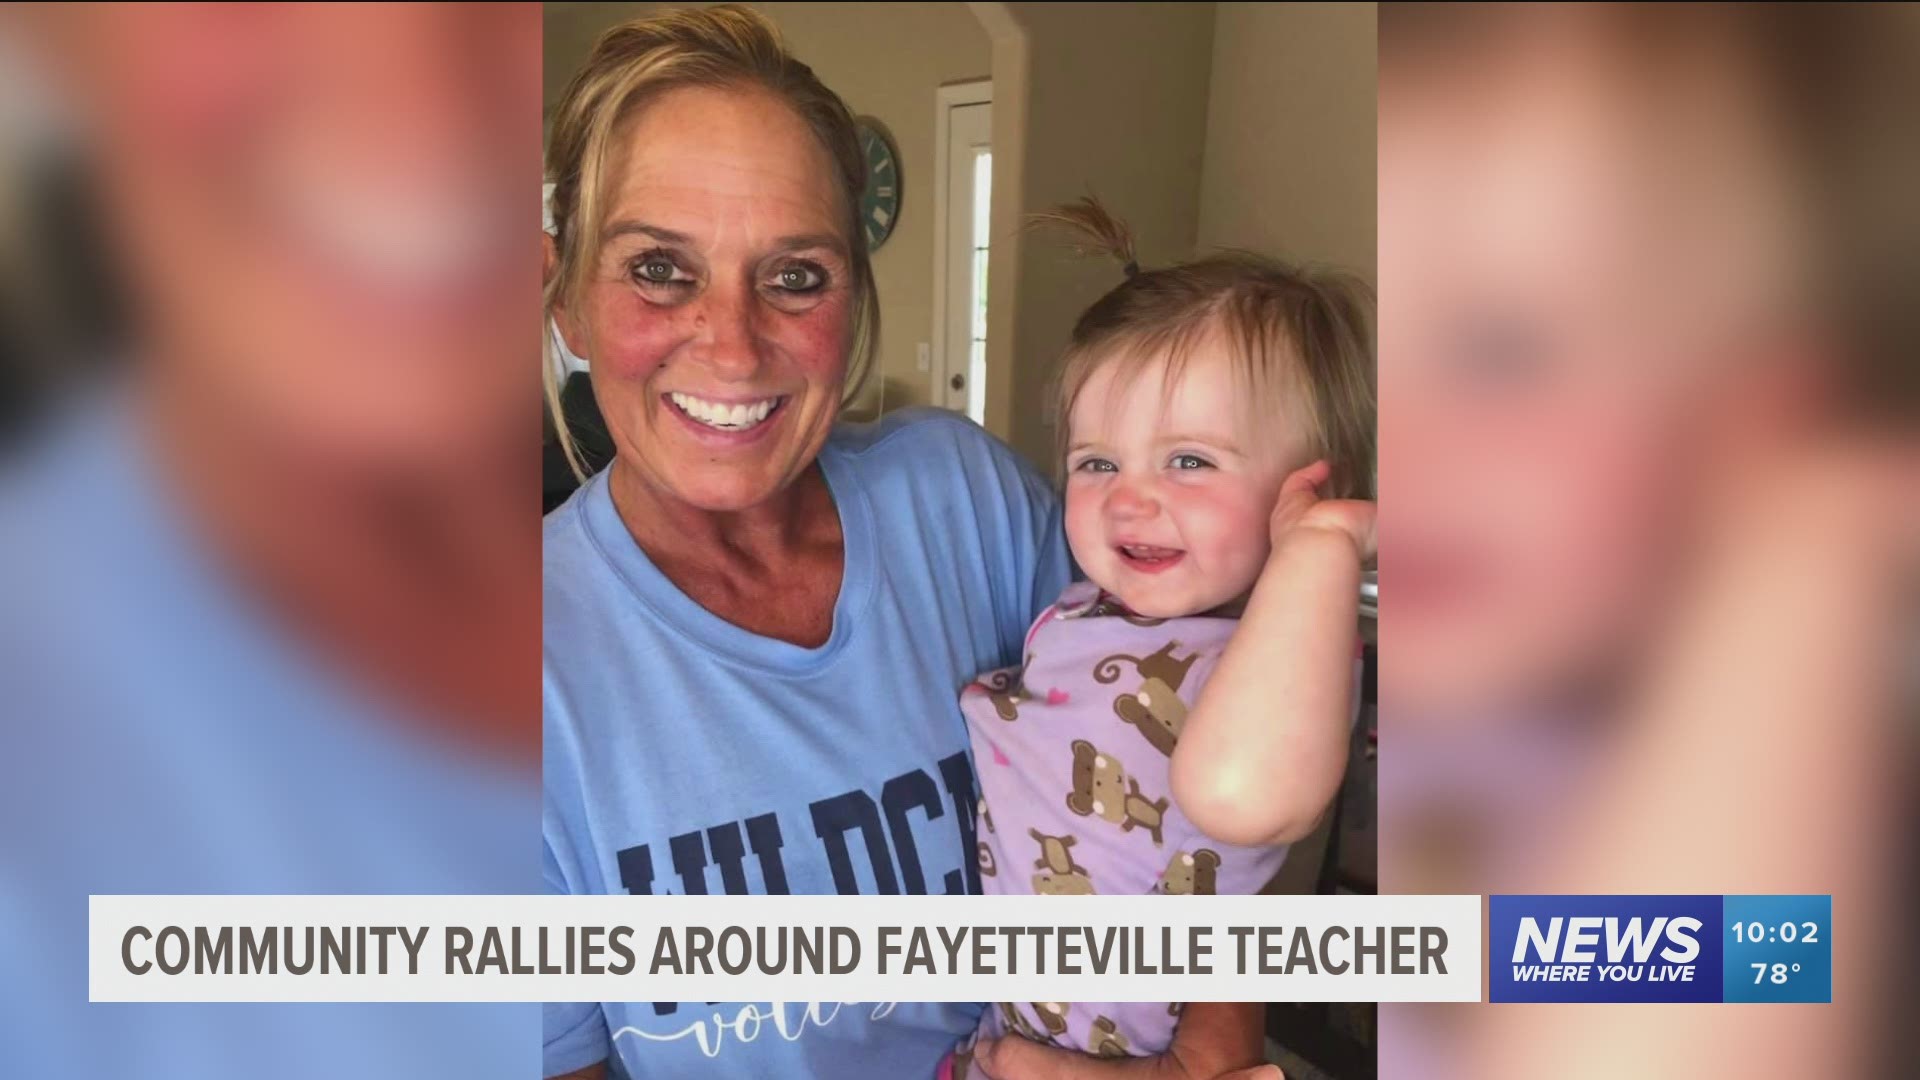 Chris Clark is a teacher and former coach at Fayetteville High School. She is hoping her story will inspire others to get yearly screenings of breast cancer.